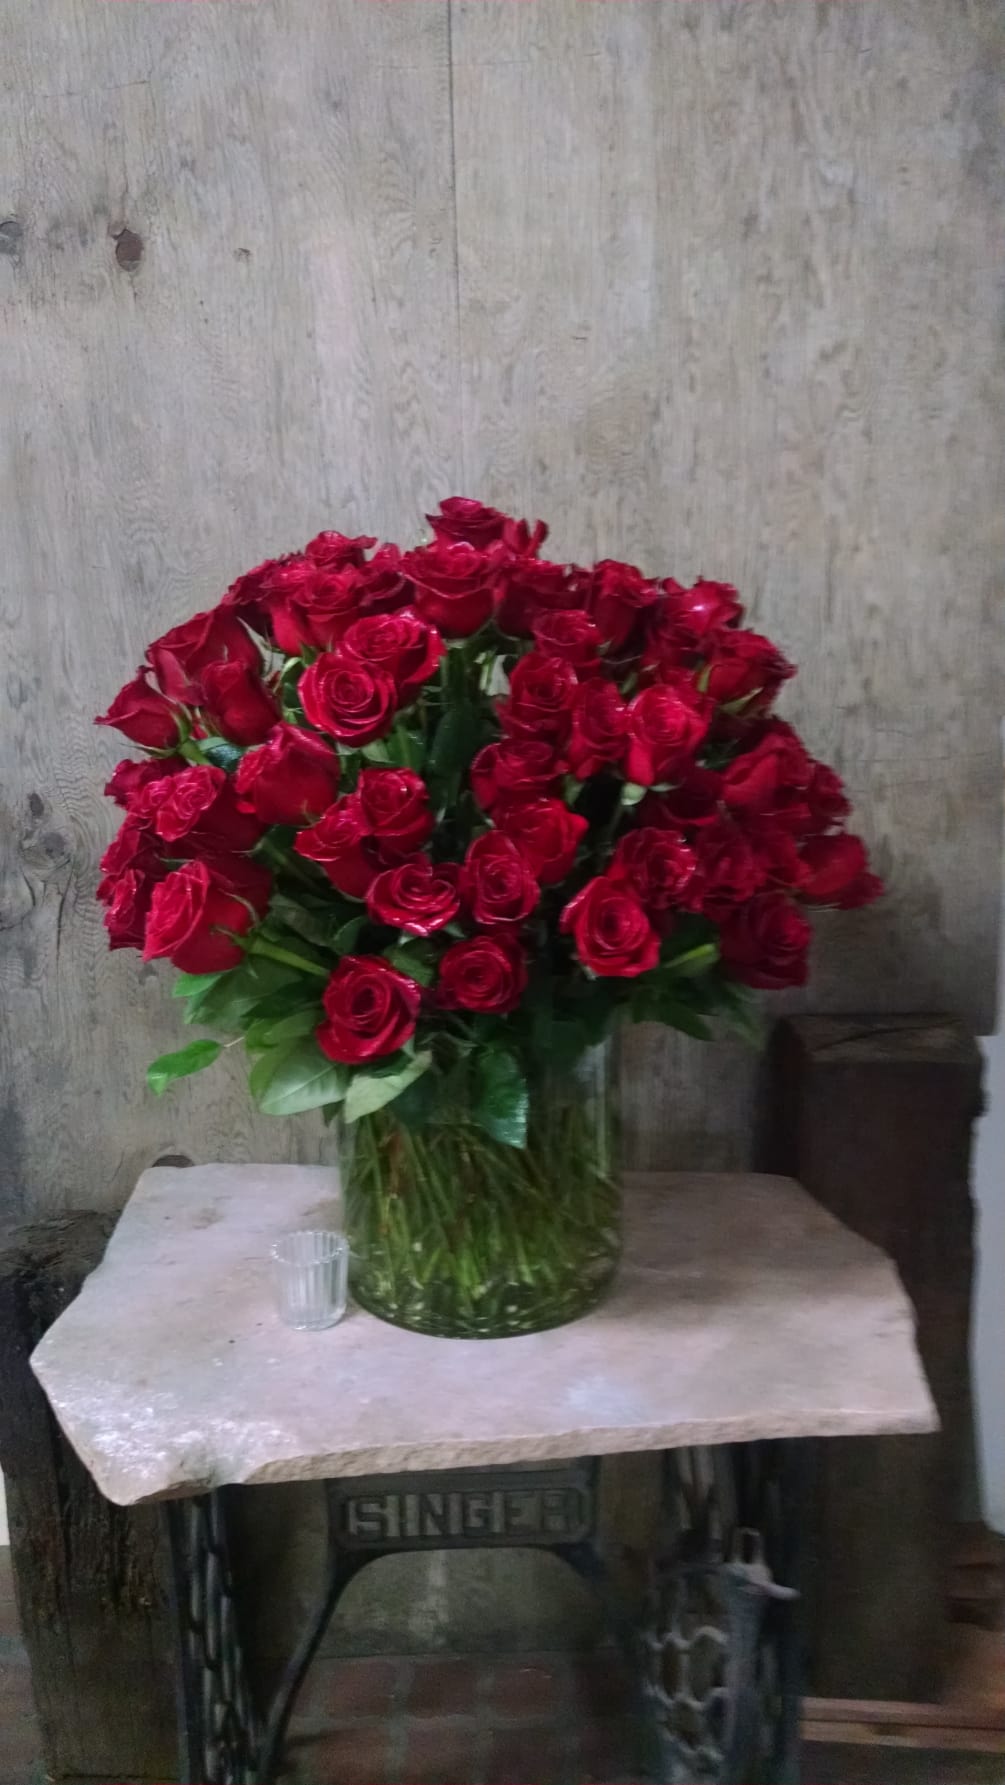  100 red roses in a cylinder vase.  Wow factor.
Quantity Limited